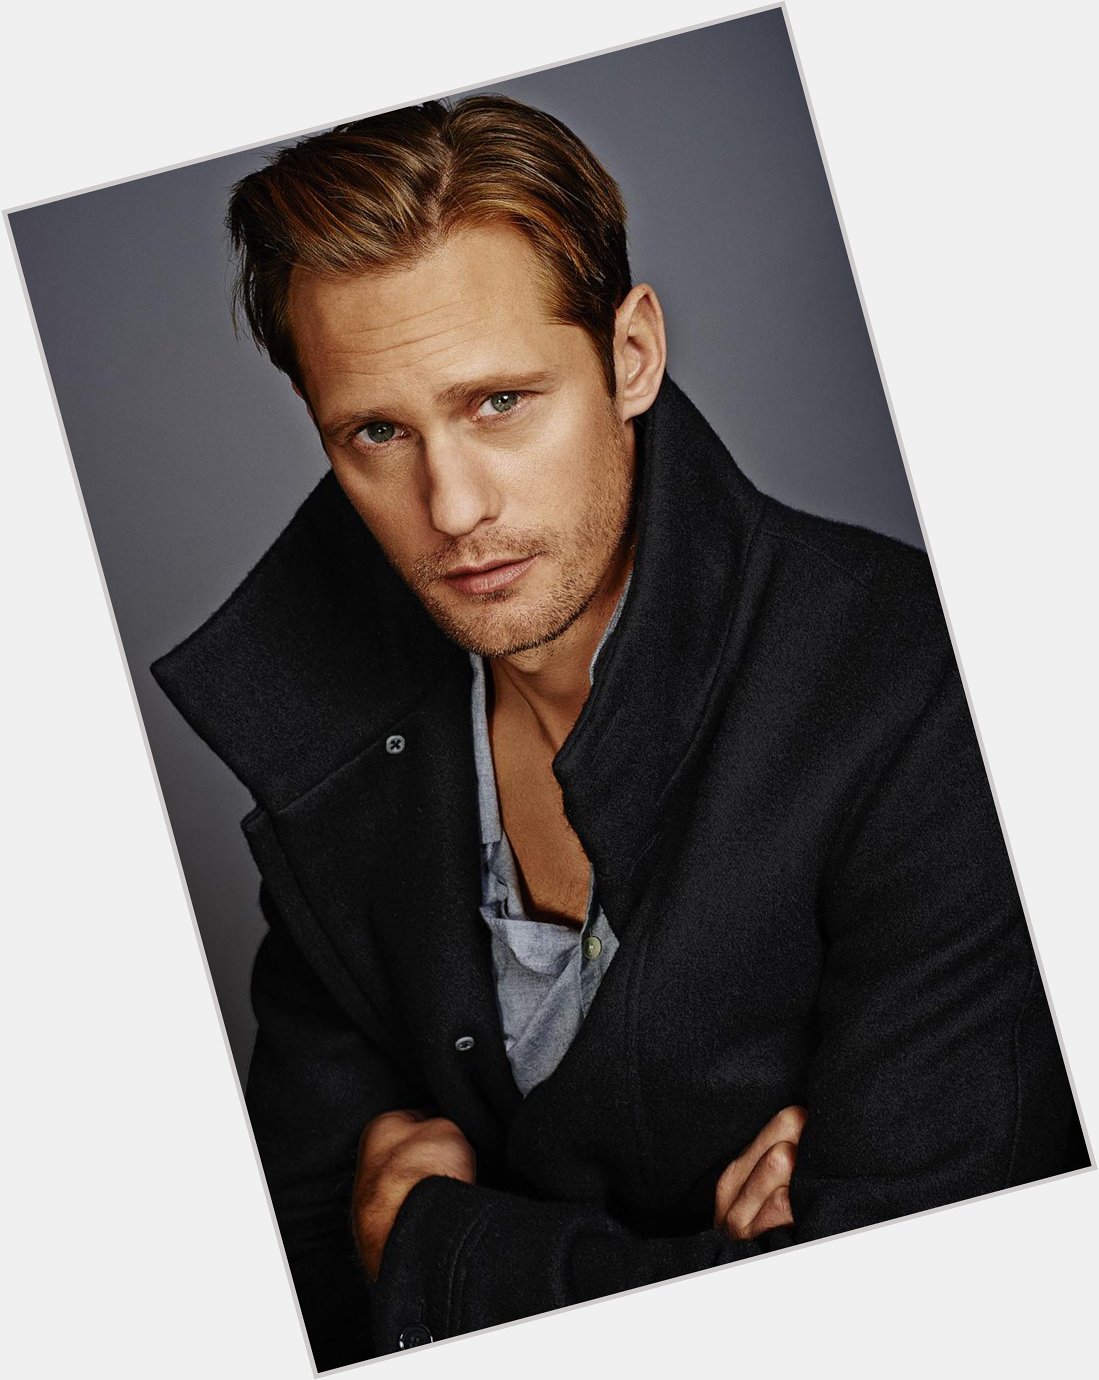 Happy birthday to Alexander Skarsgard, who\s body was carved from an ancient Swedish volcano 734 years ago today 